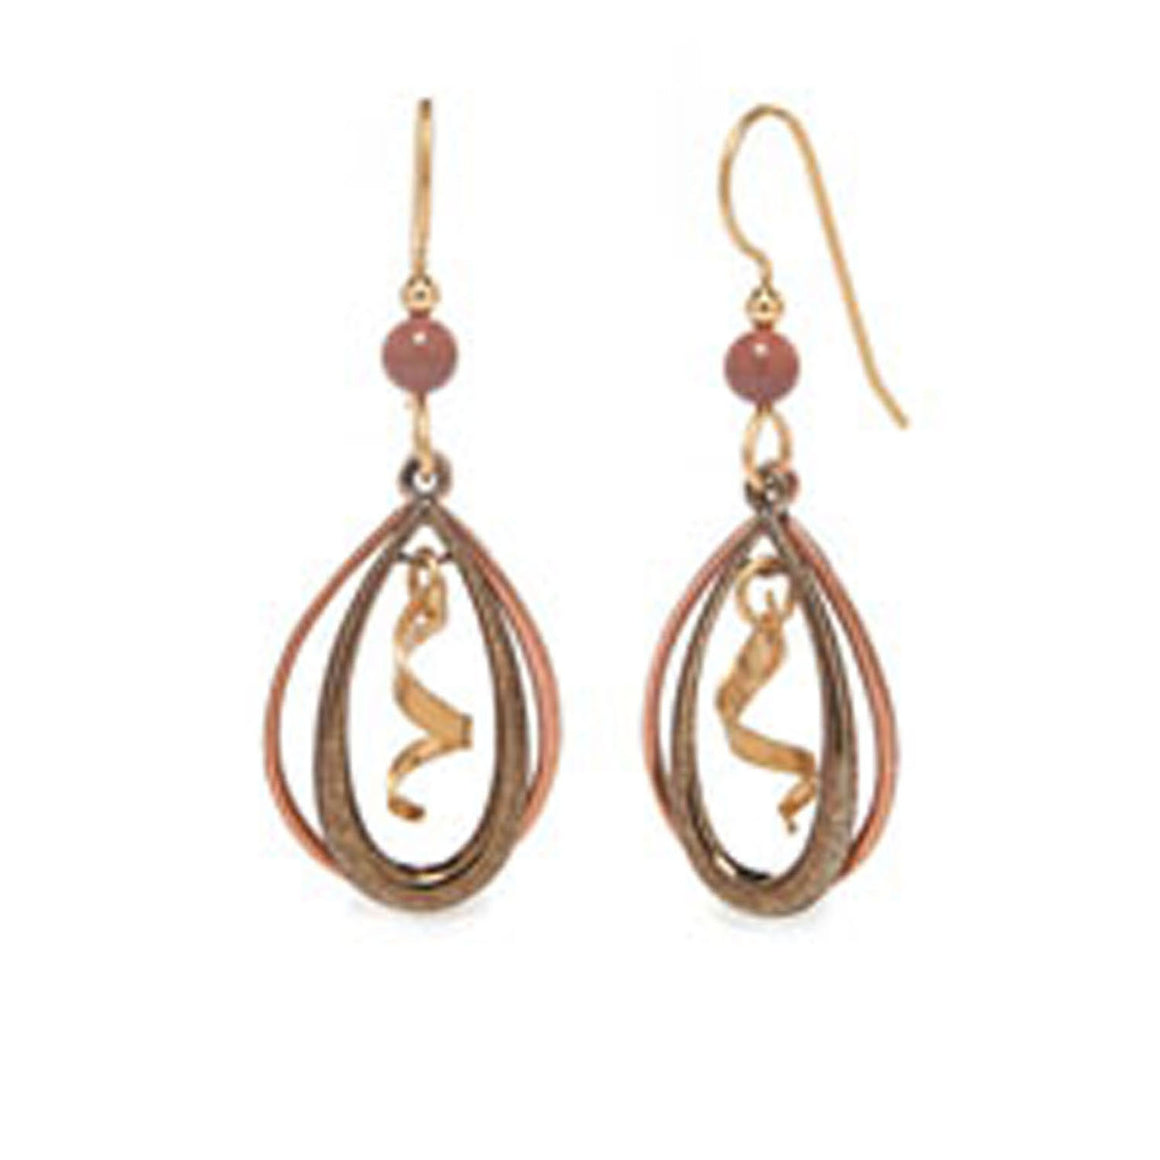 OPEN TRIO DUO WITH SPIRAL  - SILVER FOREST EARRINGS